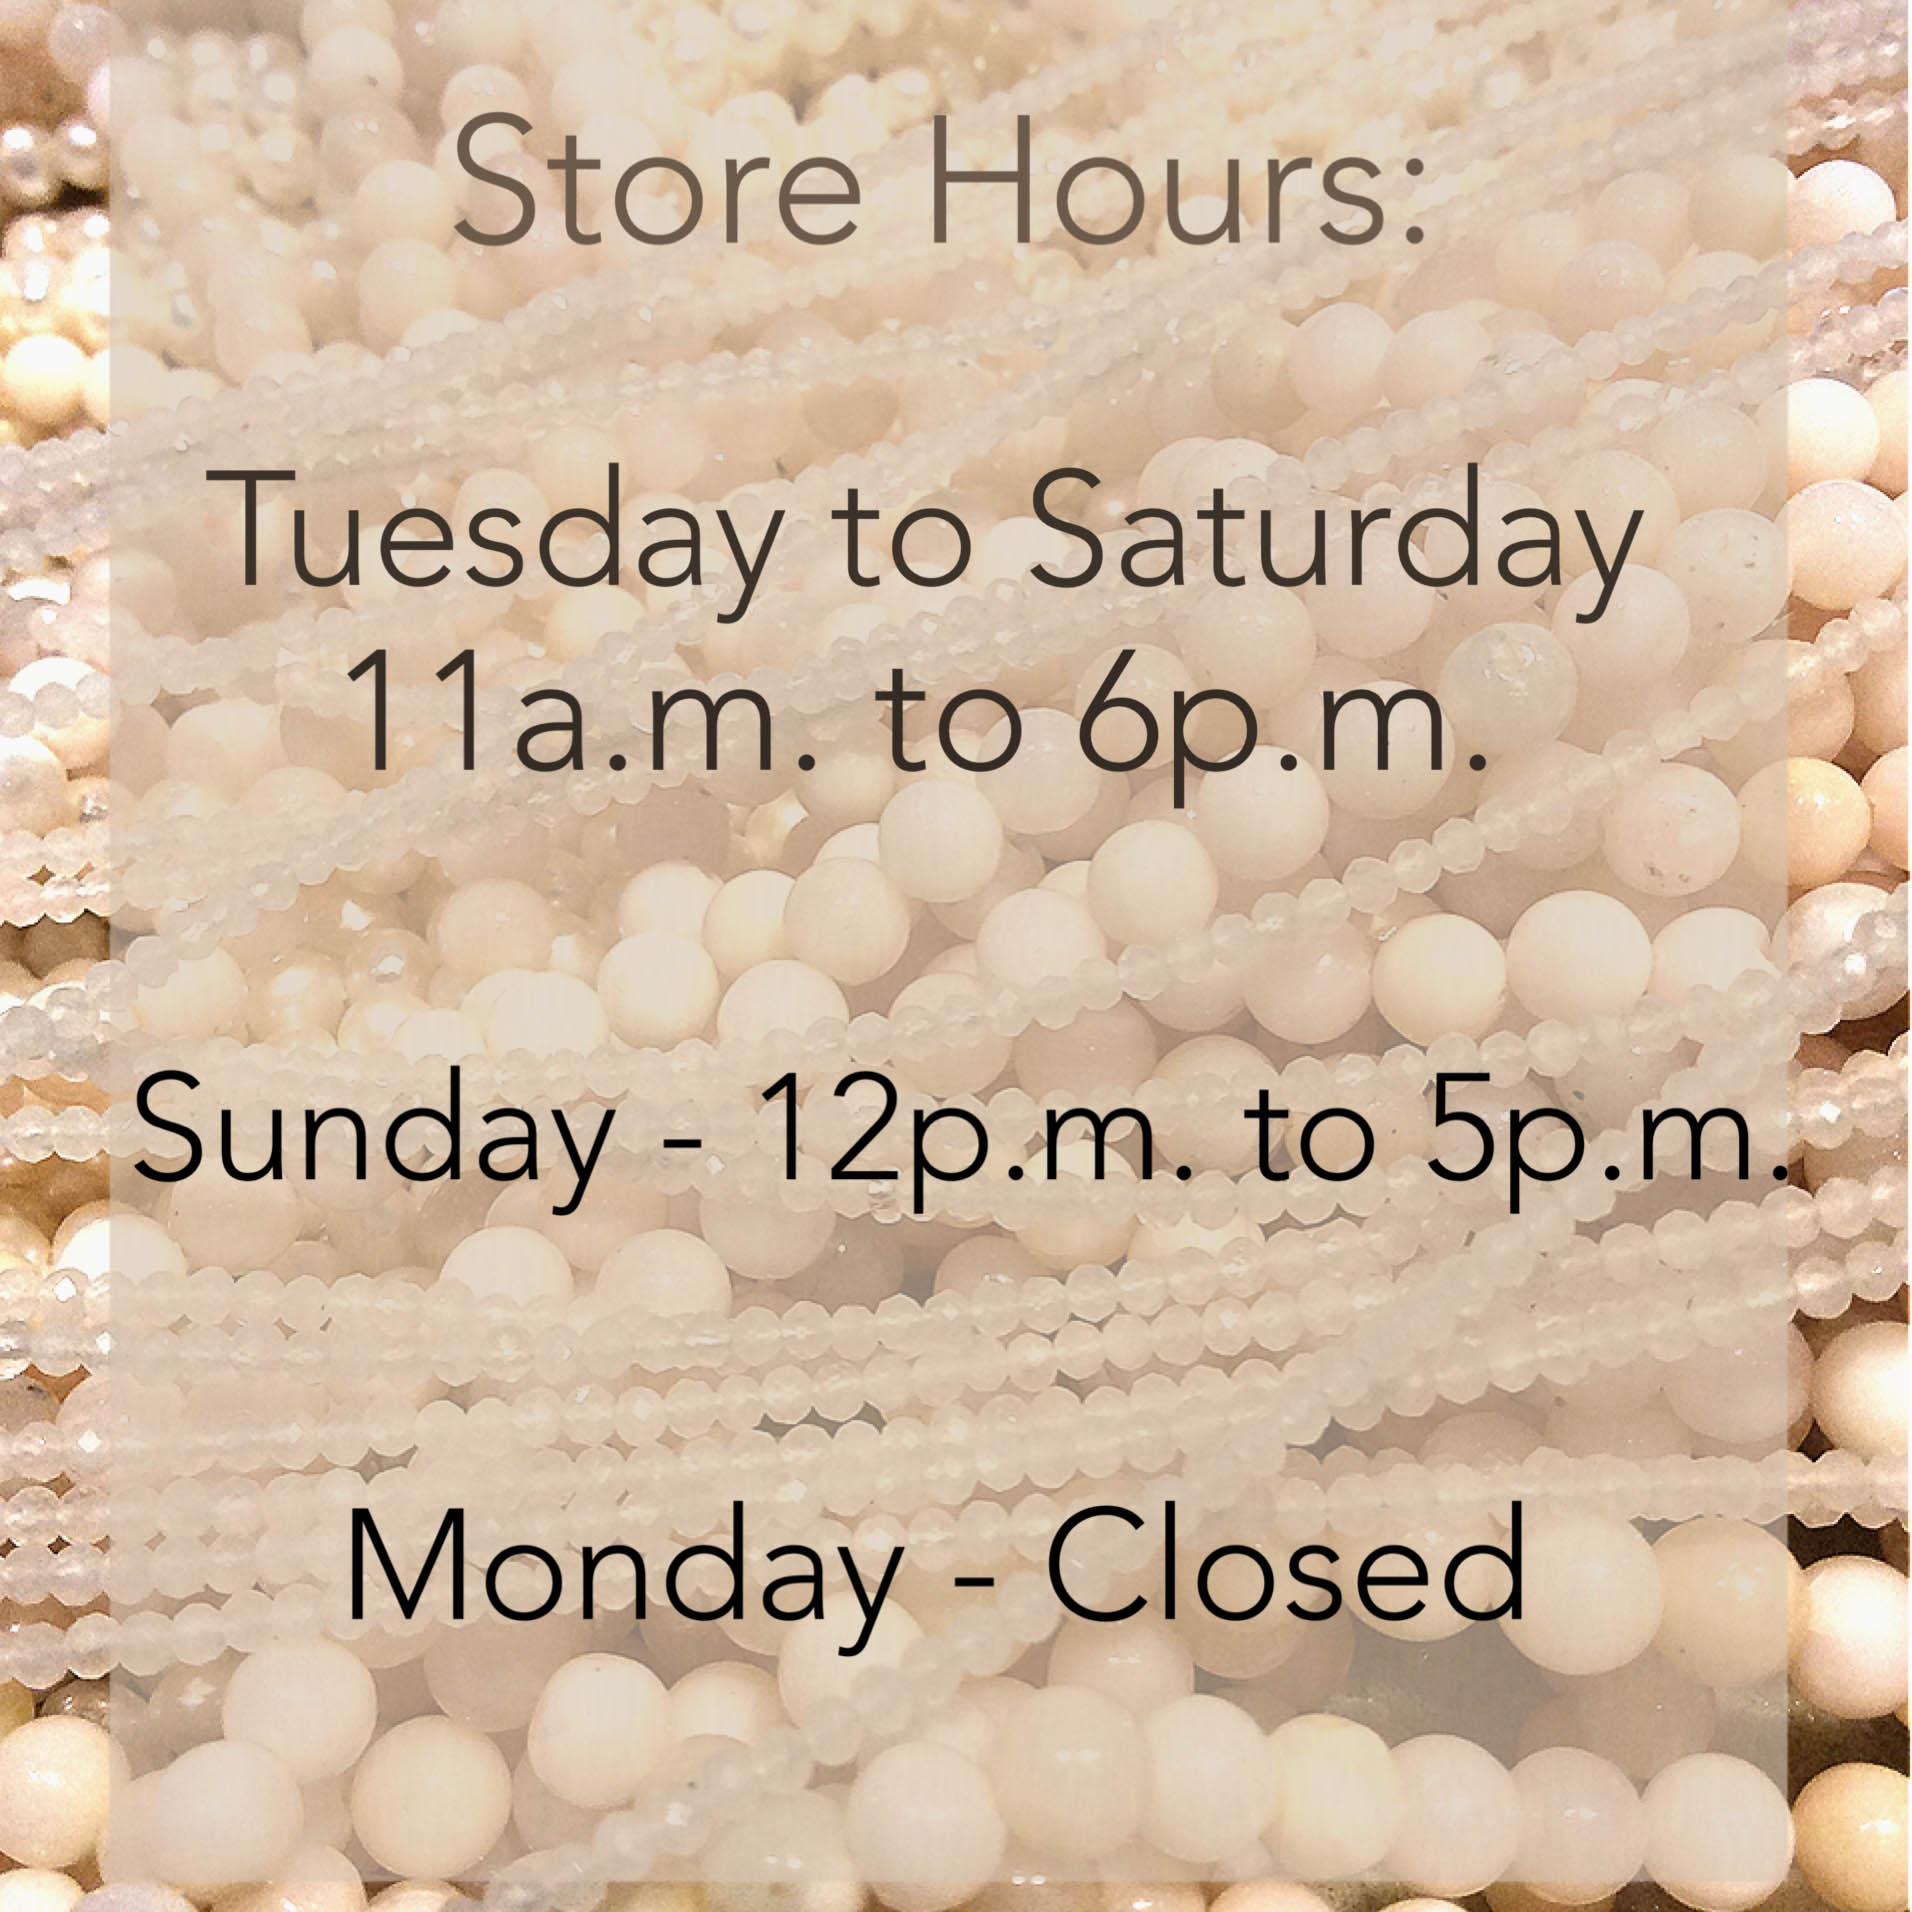 Canada Day store hours: Closed July 1st, Open 12pm to 5pm July 2nd